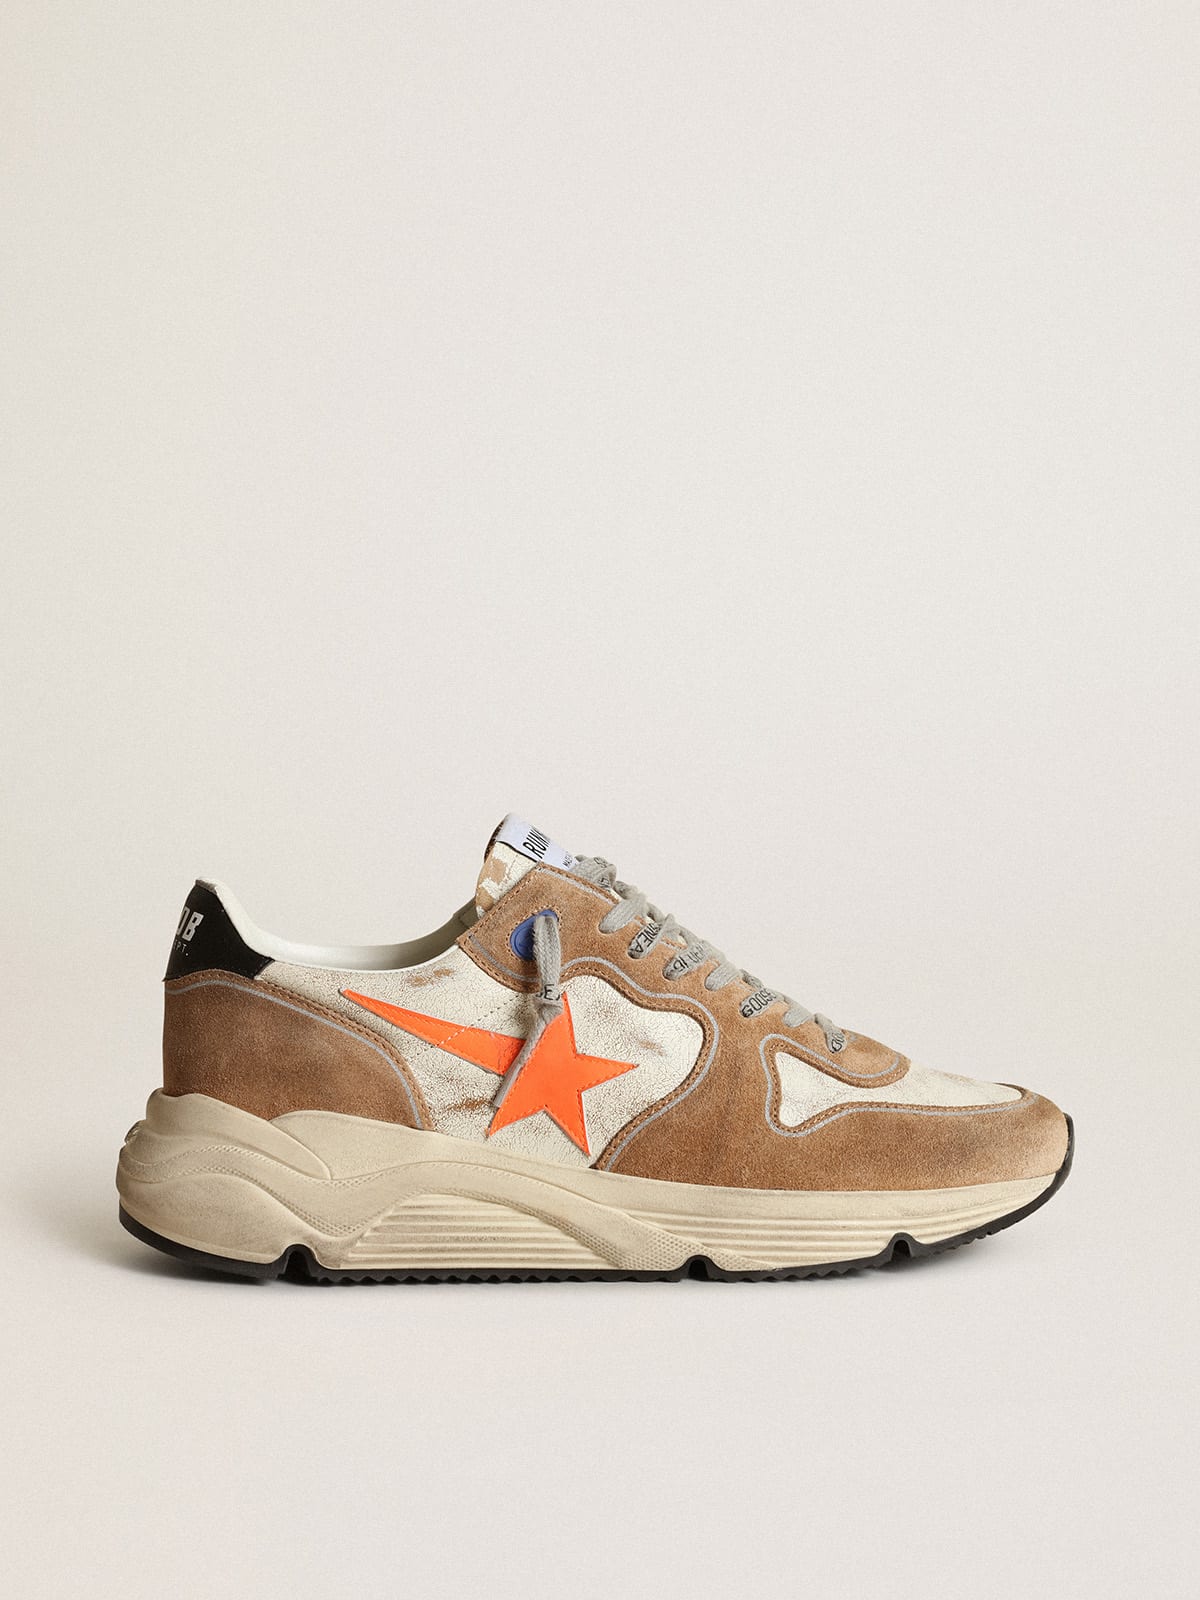 Golden Goose - Men's Running Sole LTD in white glossy leather and tobacco suede in 